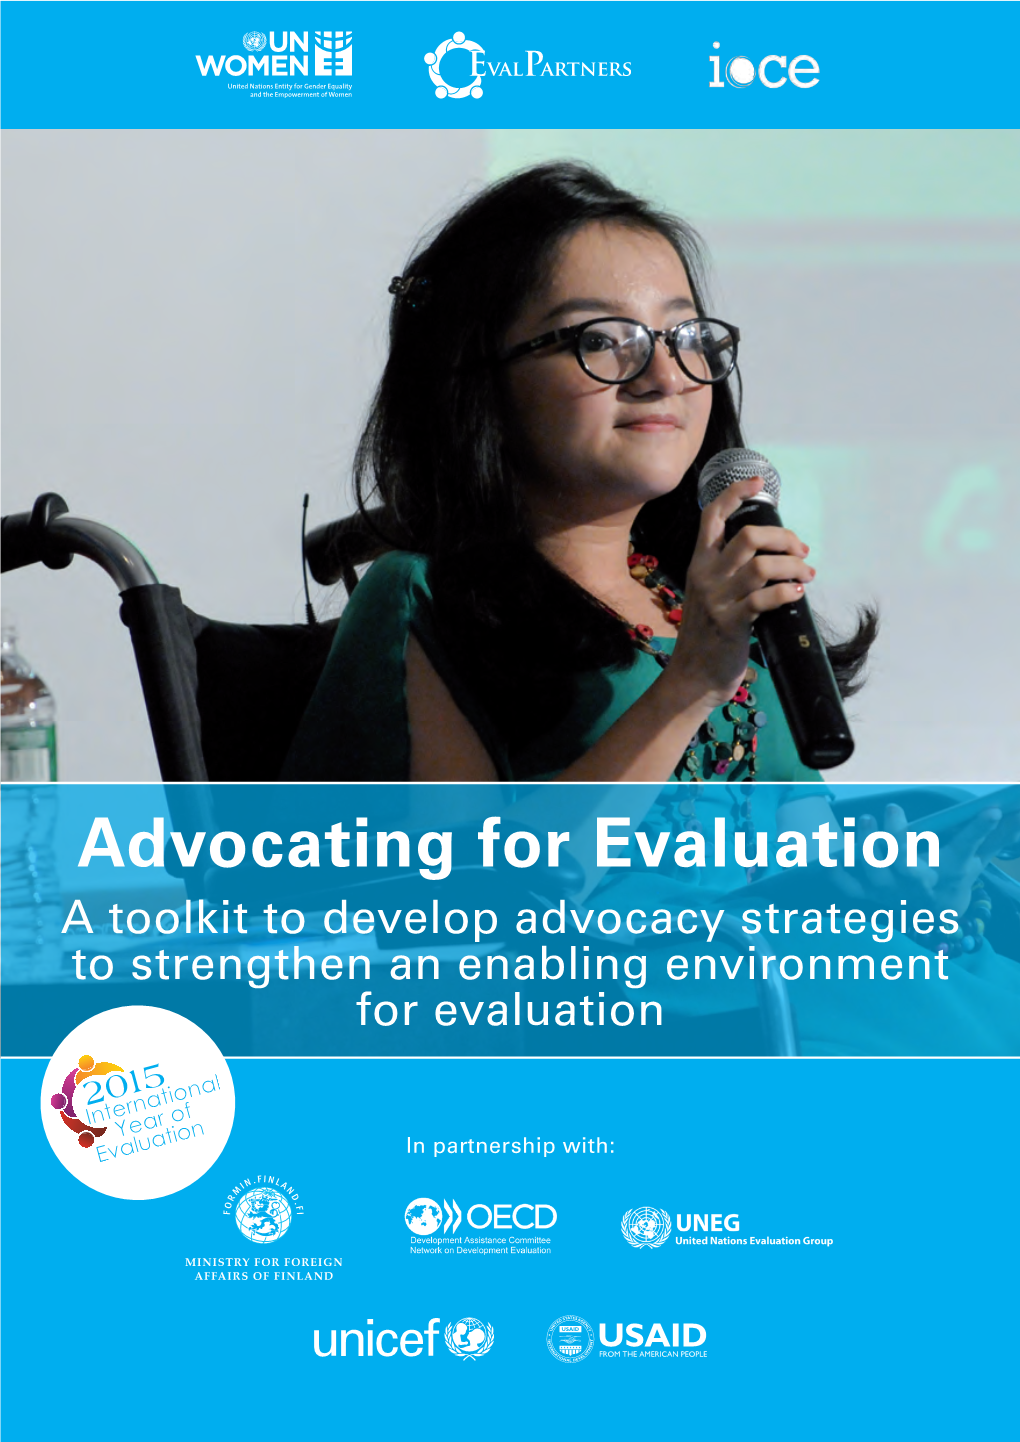 Advocating for Evaluation a Toolkit to Develop Advocacy Strategies to Strengthen an Enabling Environment for Evaluation